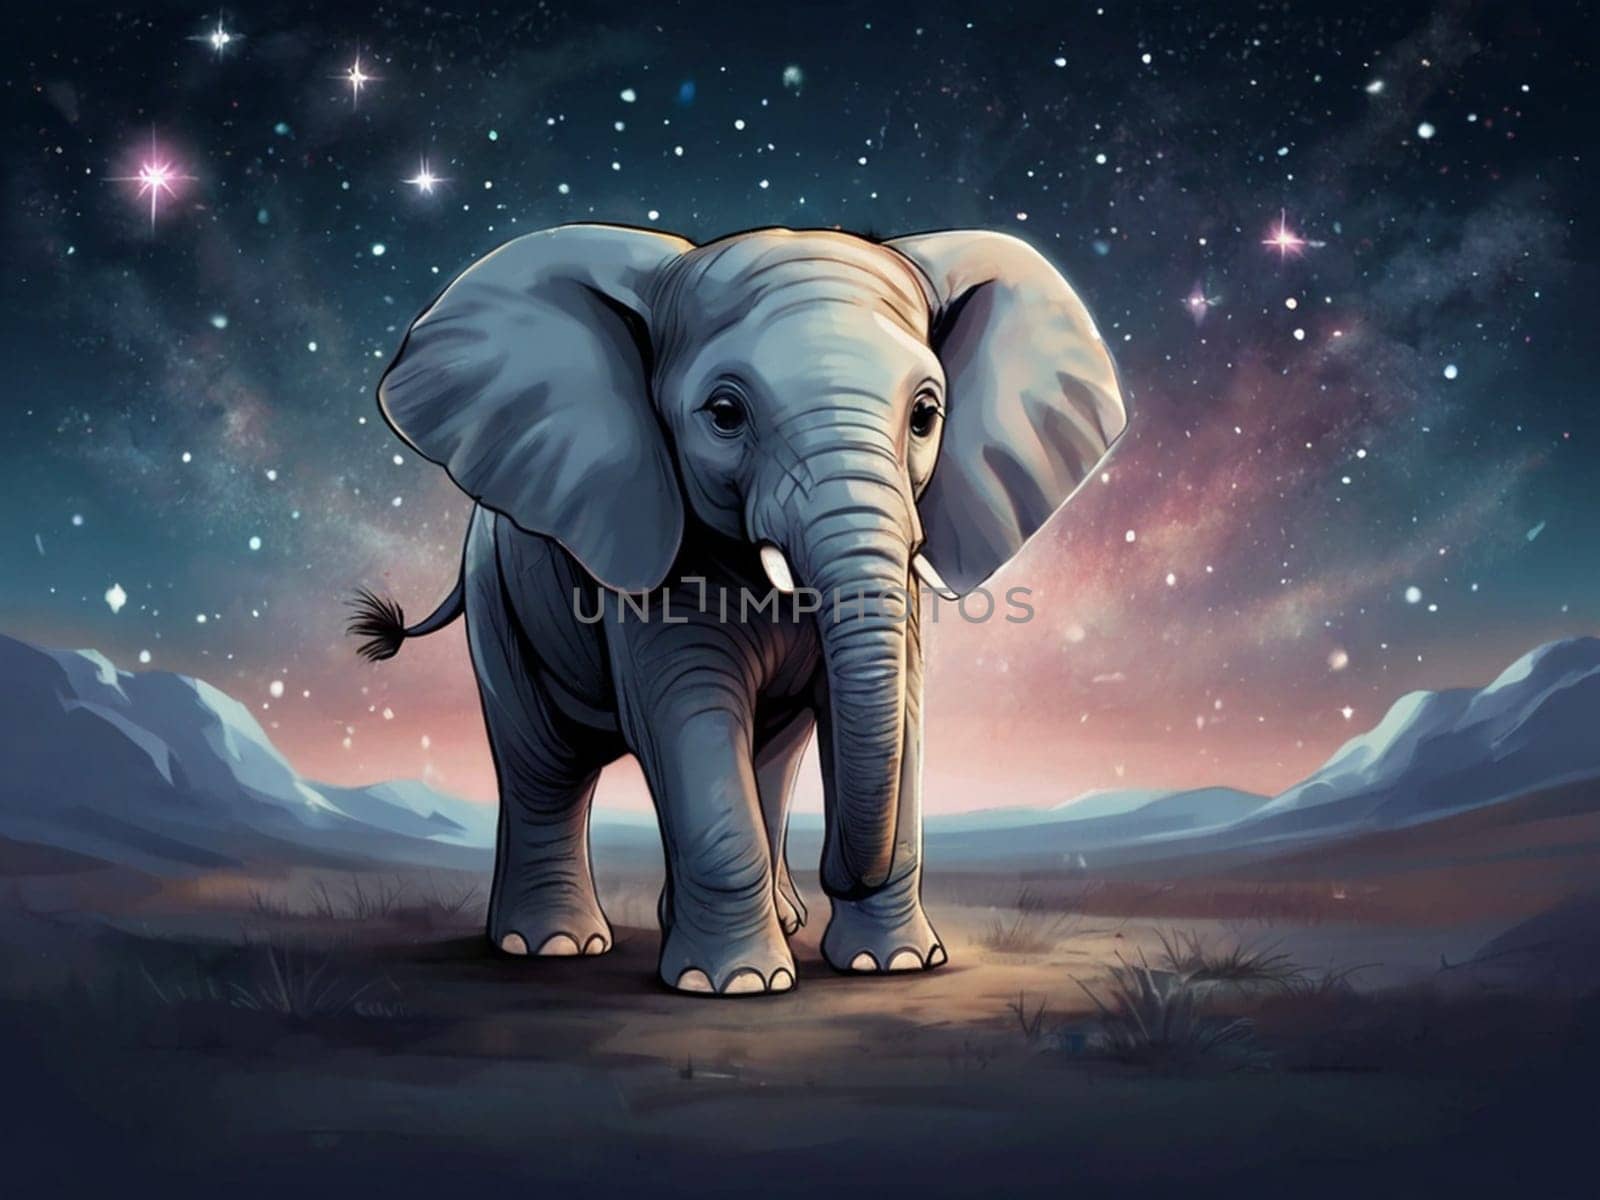 An adorable baby elephant set against a beautiful night sky dotted with stars